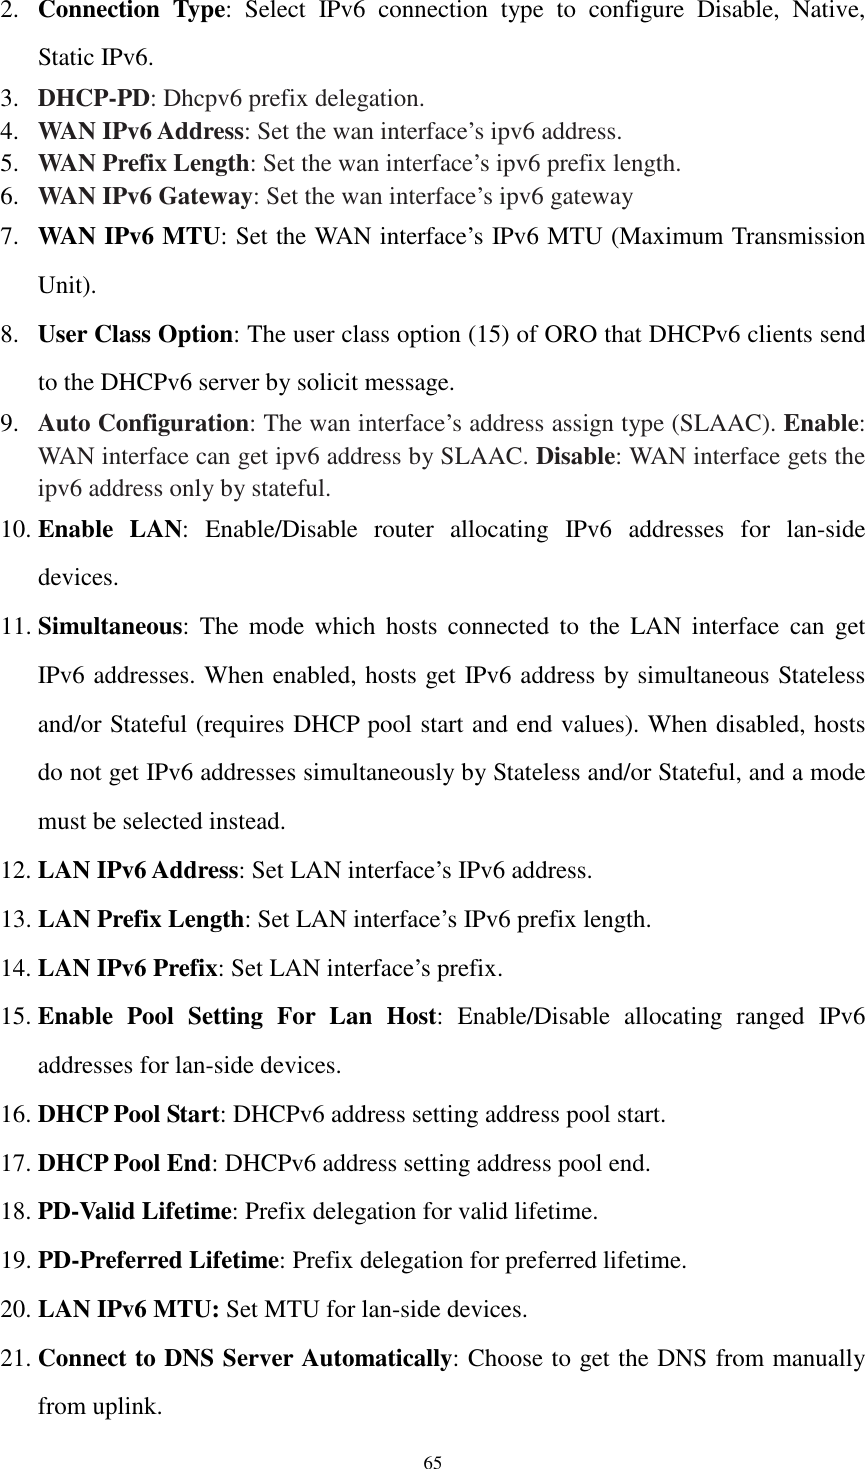  65 2. Connection  Type:  Select  IPv6  connection  type  to  configure  Disable,  Native, Static IPv6. 3. DHCP-PD: Dhcpv6 prefix delegation. 4. WAN IPv6 Address: Set the wan interface’s ipv6 address. 5. WAN Prefix Length: Set the wan interface’s ipv6 prefix length. 6. WAN IPv6 Gateway: Set the wan interface’s ipv6 gateway 7. WAN IPv6 MTU: Set the WAN interface’s IPv6 MTU (Maximum Transmission Unit). 8. User Class Option: The user class option (15) of ORO that DHCPv6 clients send to the DHCPv6 server by solicit message. 9. Auto Configuration: The wan interface’s address assign type (SLAAC). Enable: WAN interface can get ipv6 address by SLAAC. Disable: WAN interface gets the ipv6 address only by stateful. 10. Enable  LAN:  Enable/Disable  router  allocating  IPv6  addresses  for  lan-side devices. 11. Simultaneous: The  mode  which  hosts  connected  to  the  LAN  interface  can  get IPv6 addresses. When enabled, hosts get IPv6 address by simultaneous Stateless and/or Stateful (requires DHCP pool start and end values). When disabled, hosts do not get IPv6 addresses simultaneously by Stateless and/or Stateful, and a mode must be selected instead. 12. LAN IPv6 Address: Set LAN interface’s IPv6 address. 13. LAN Prefix Length: Set LAN interface’s IPv6 prefix length. 14. LAN IPv6 Prefix: Set LAN interface’s prefix. 15. Enable  Pool  Setting  For  Lan  Host:  Enable/Disable  allocating  ranged  IPv6 addresses for lan-side devices. 16. DHCP Pool Start: DHCPv6 address setting address pool start. 17. DHCP Pool End: DHCPv6 address setting address pool end. 18. PD-Valid Lifetime: Prefix delegation for valid lifetime. 19. PD-Preferred Lifetime: Prefix delegation for preferred lifetime. 20. LAN IPv6 MTU: Set MTU for lan-side devices. 21. Connect to DNS Server Automatically: Choose to get the DNS from manually from uplink. 